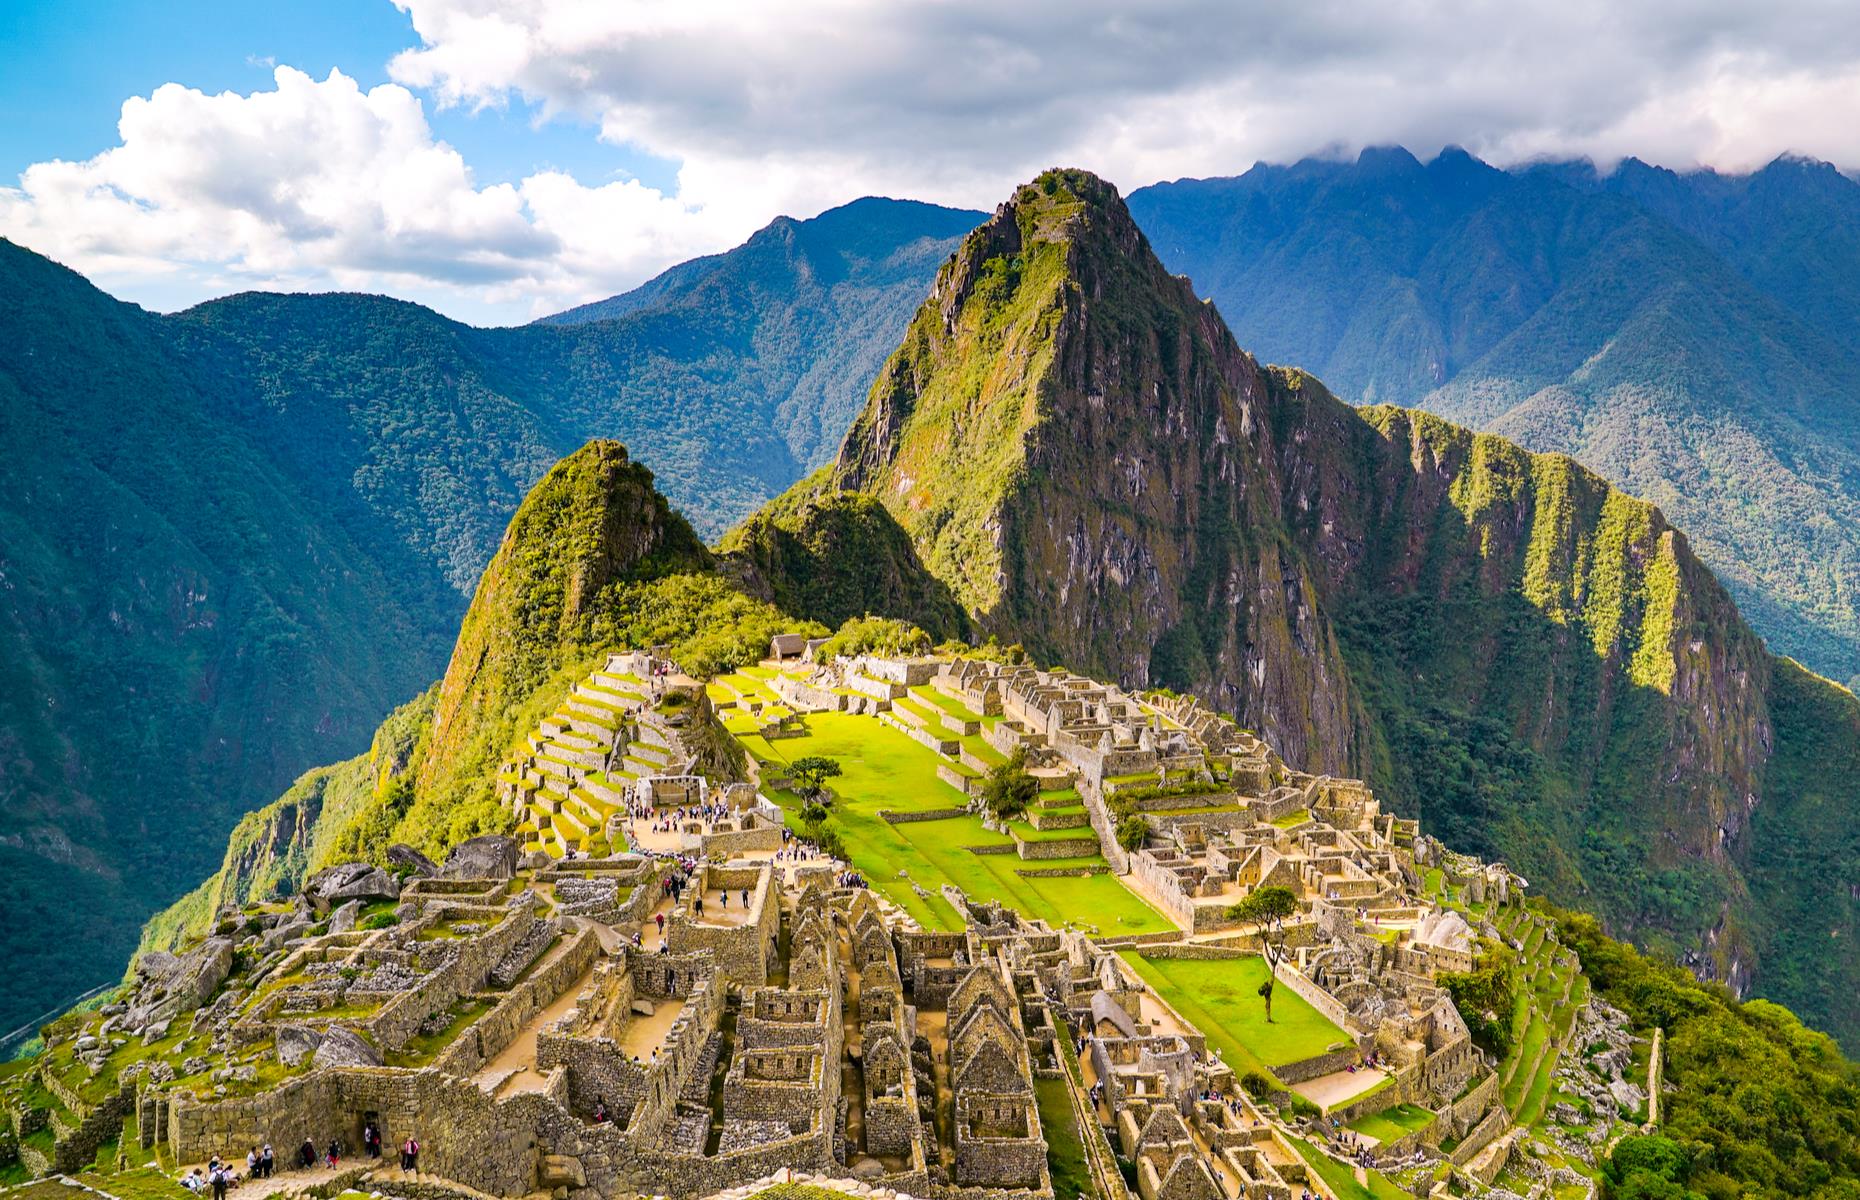 <p>There’s a striking resemblance between Peru's ancient Incan citadel Machu Picchu and the setting of Disney’s <em>The Emperor's New Groove</em>. The film features the voices of John Goodman as llama herder, Pacha, and David Spade as Kuzco, the young Incan emperor who plans to build a lavish summer house high in the hills. With its jungle-clad peaks, steep cliffs and jaguars, Peru provided the film's producers with rich inspiration on their research trips to the Urubamba Valley near Cusco.</p>